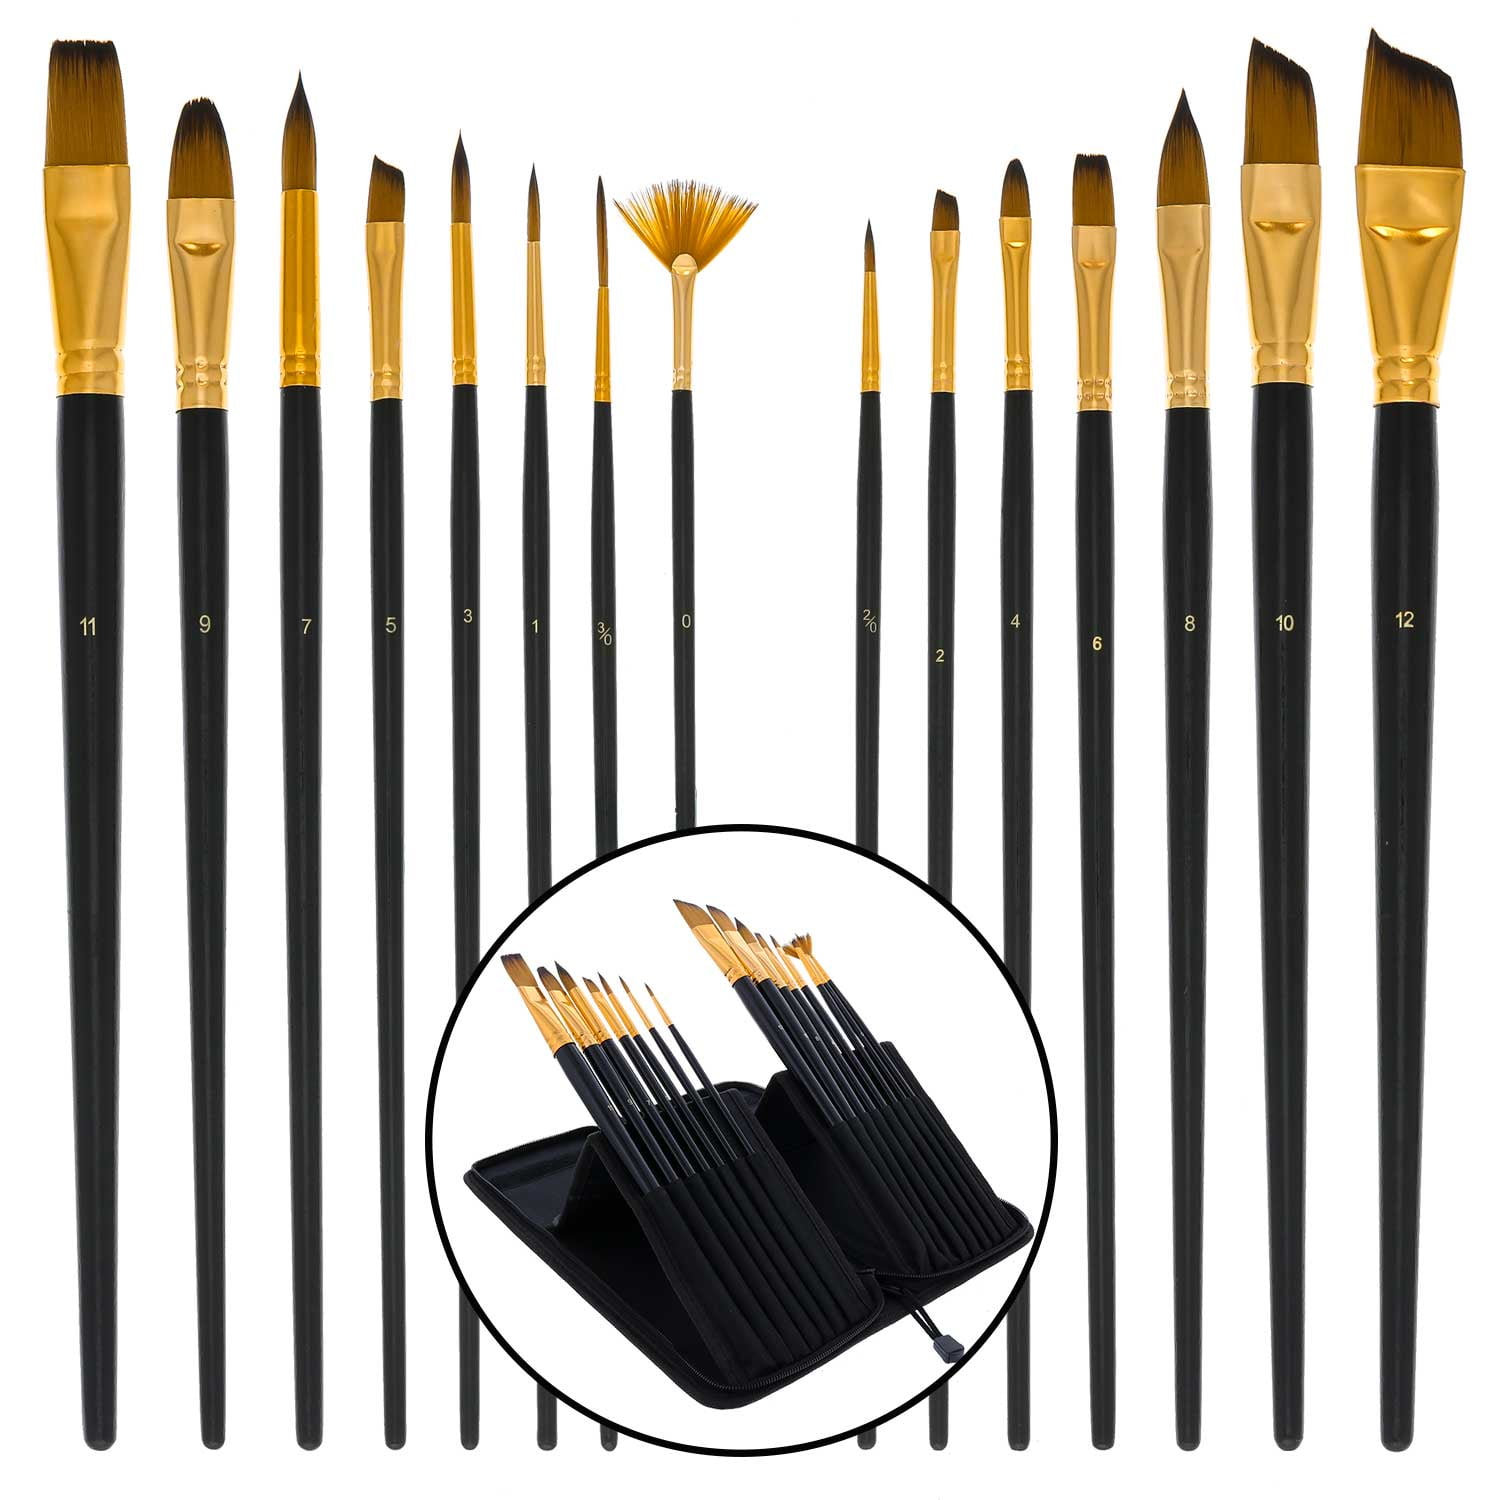 Artist Paint Brushes Set Acrylic and Face Paintbrushes Oil 15 Artist Brushes with a Paint Brush Holder/Pop Up Stand Included Watercolour